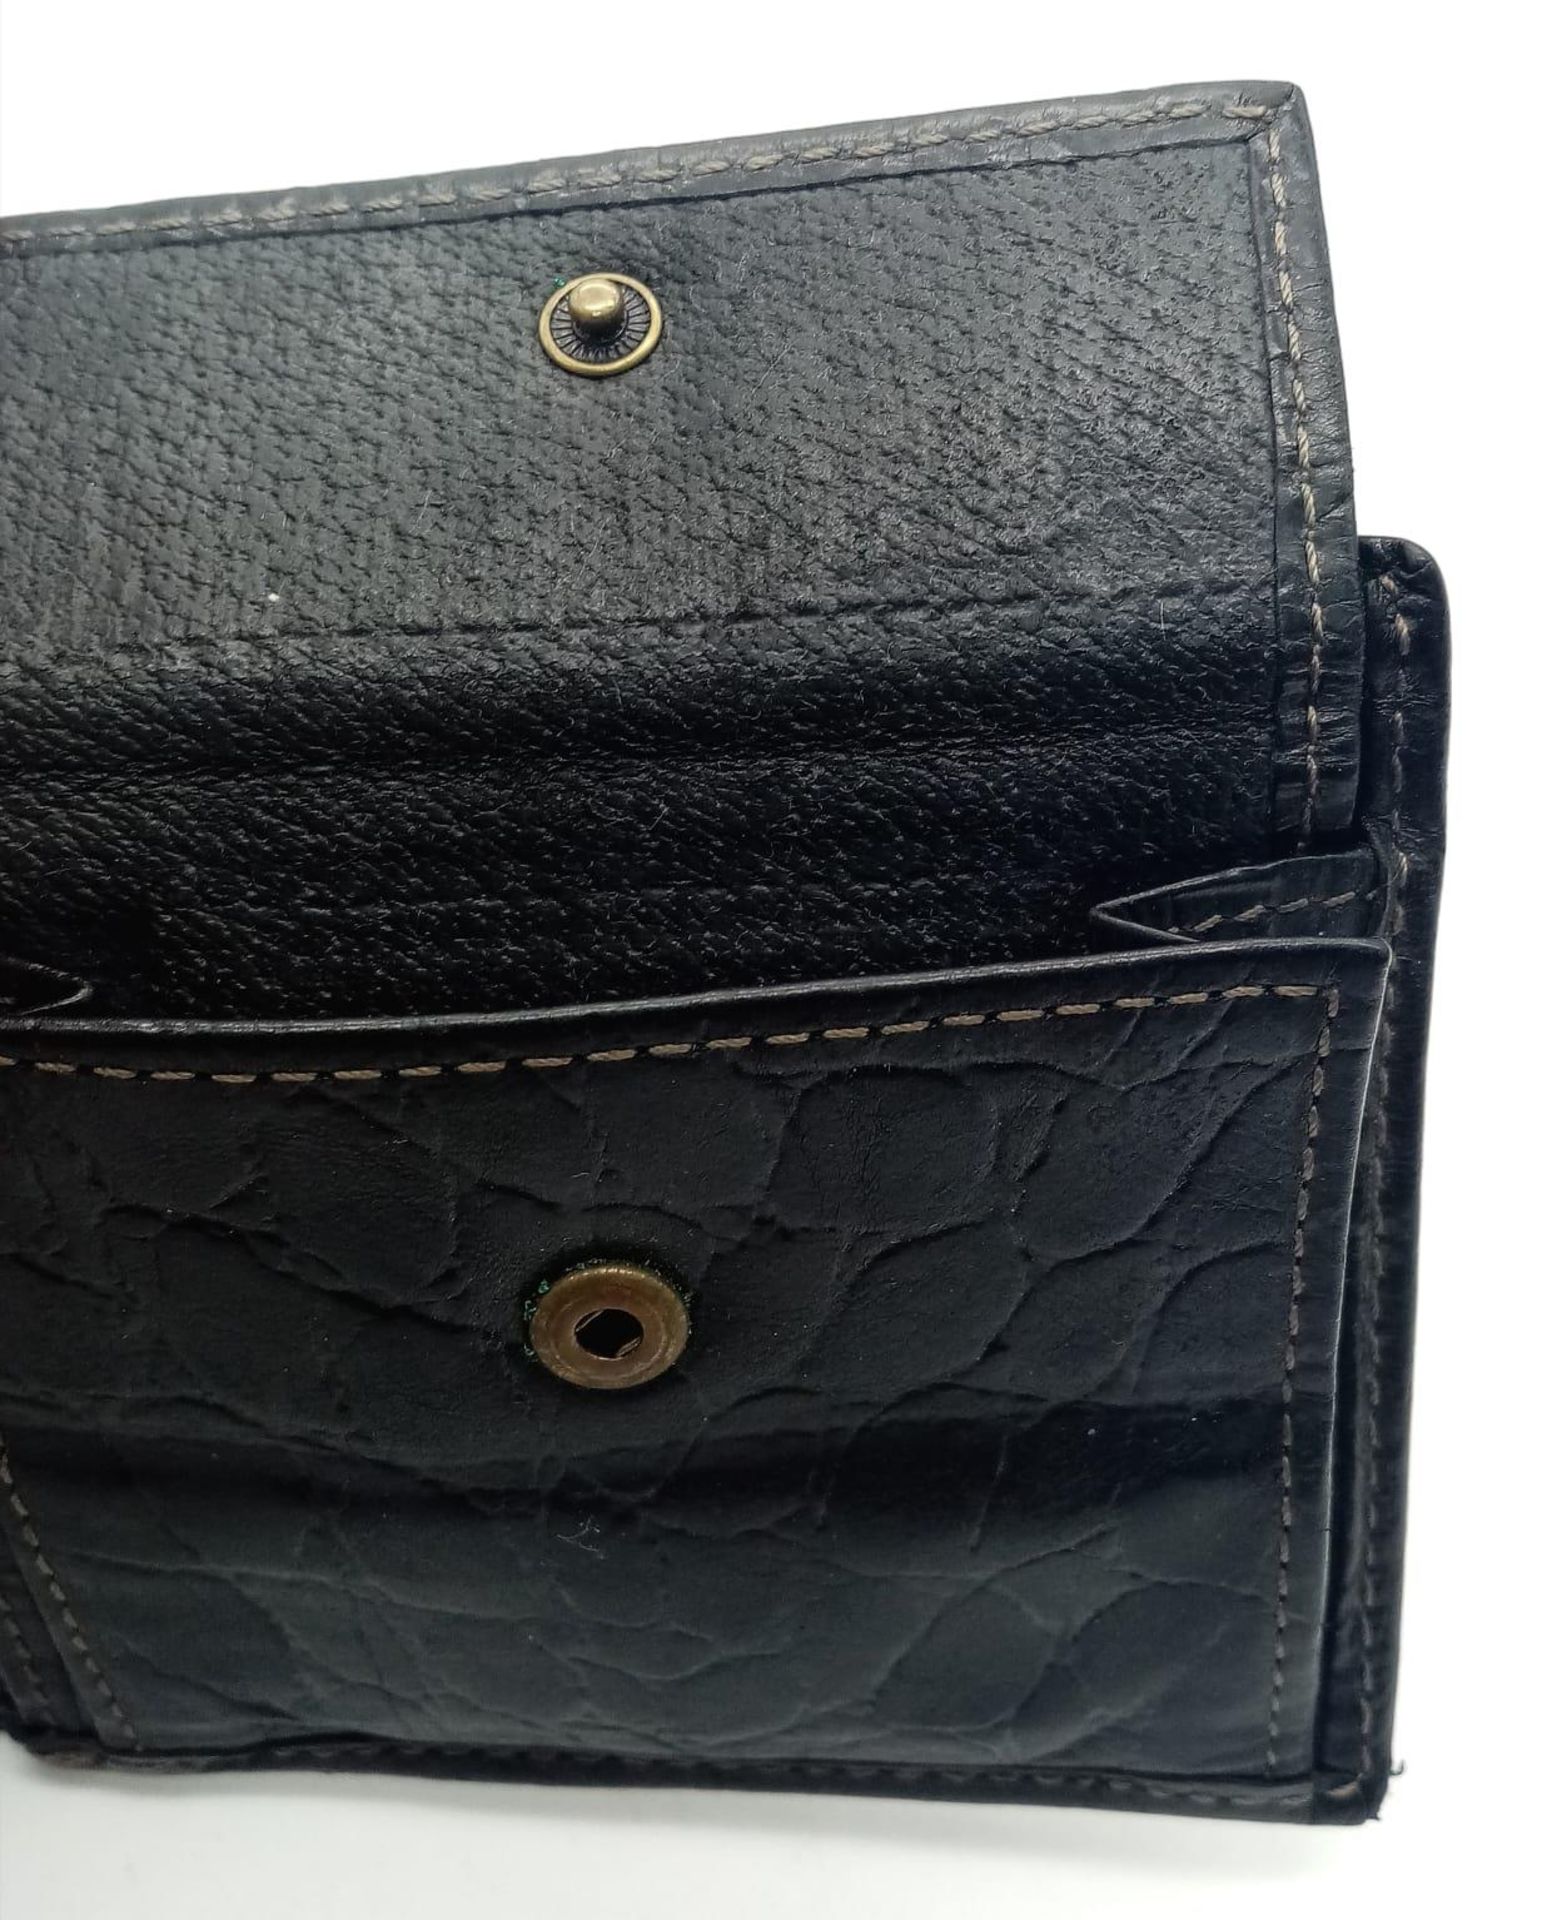 A black leather Mulberry wallet, can hold up to 8 cards, includes a coin pouch. Size approx. 11x9cm. - Bild 4 aus 6